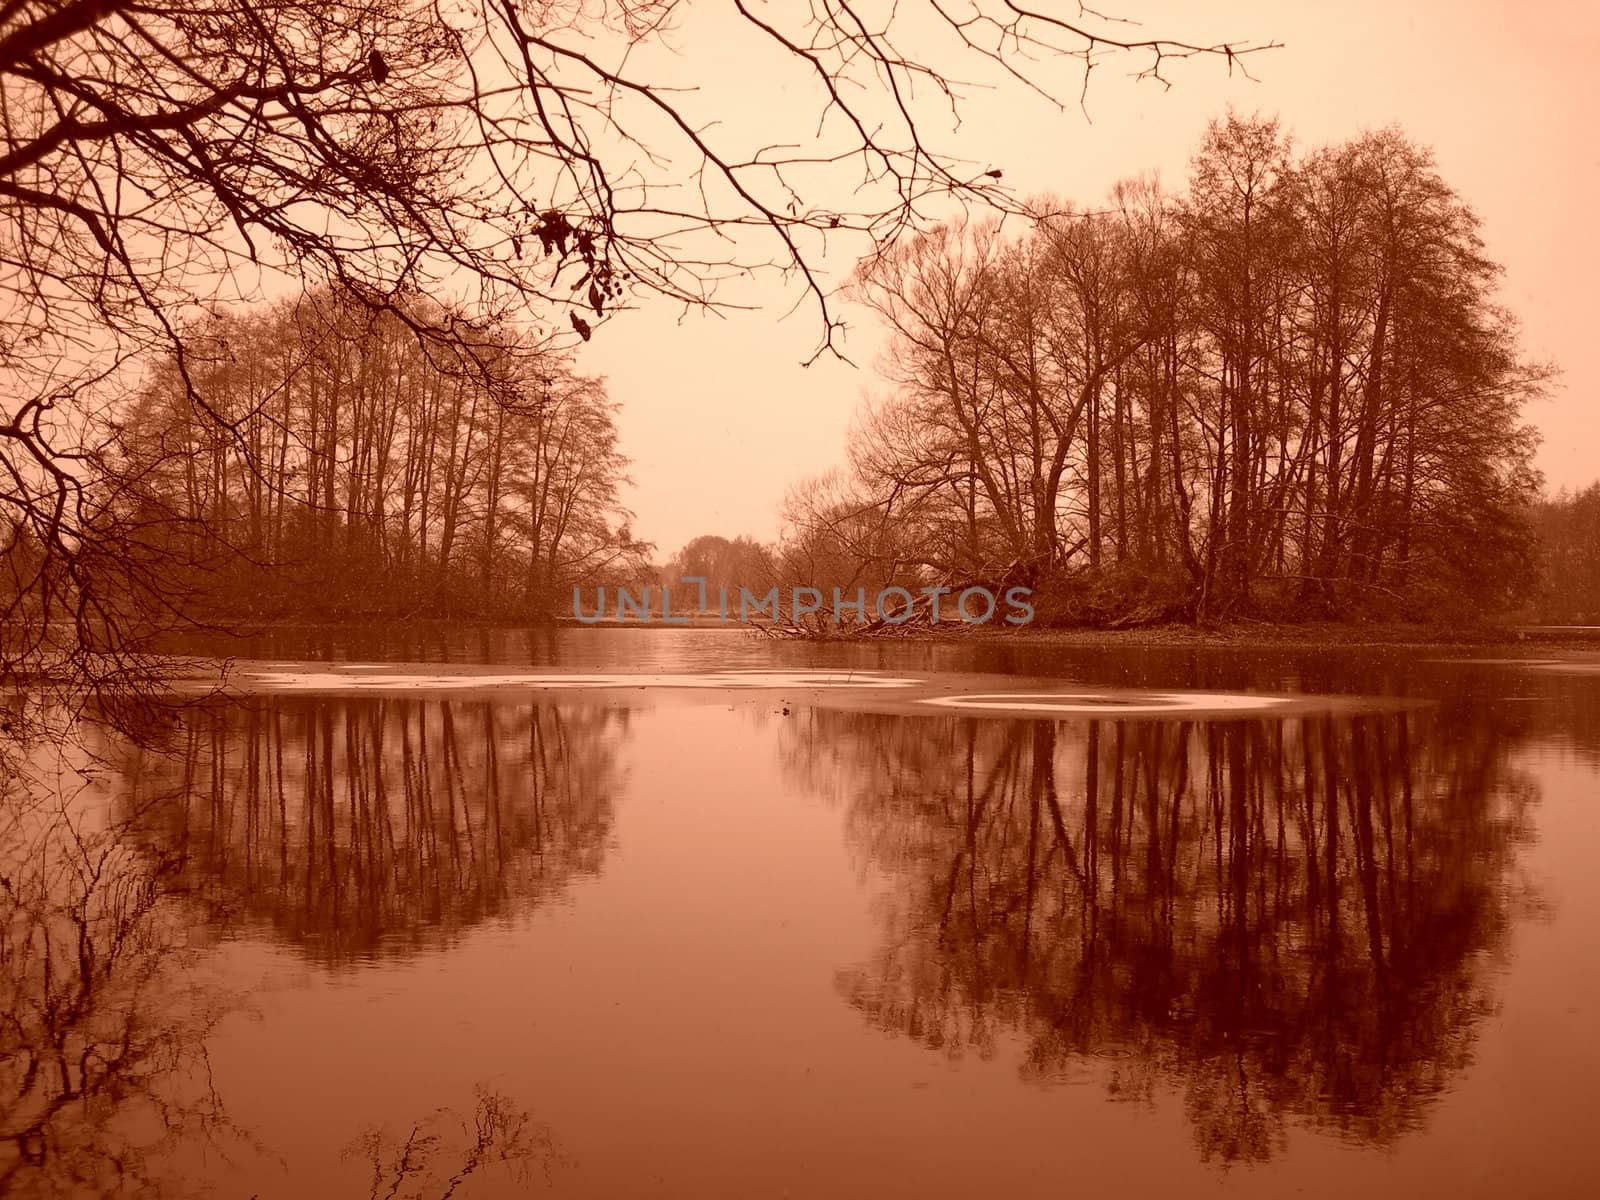  As the winter begun, the lake started to be covered by ice - in sepia   